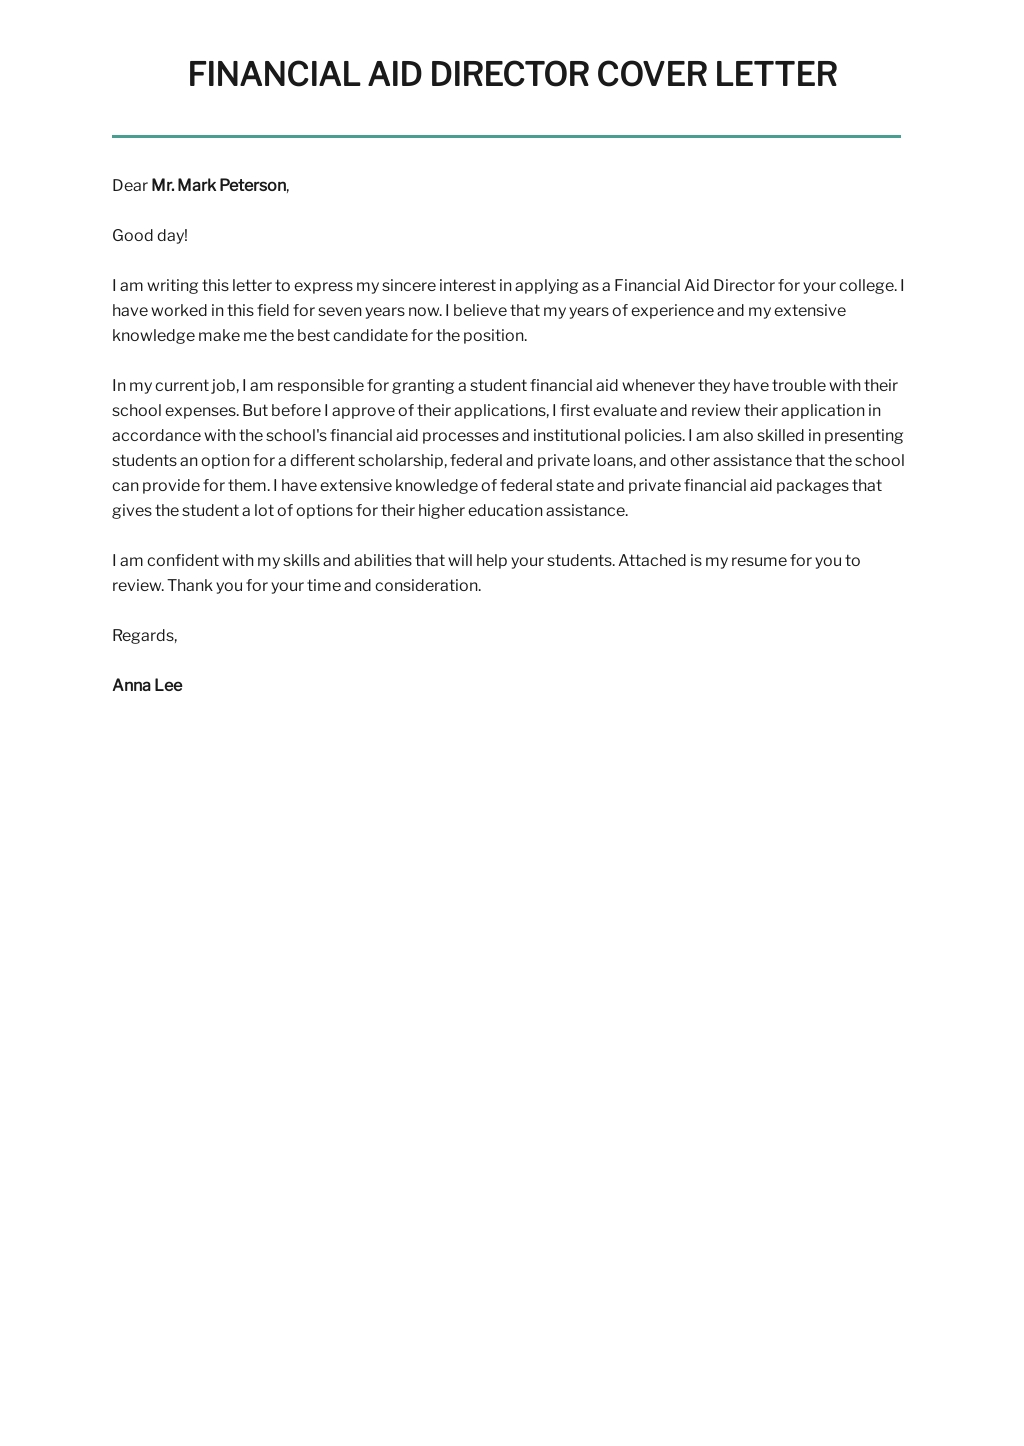 Free Financial Aid Director Cover Letter Template.jpe